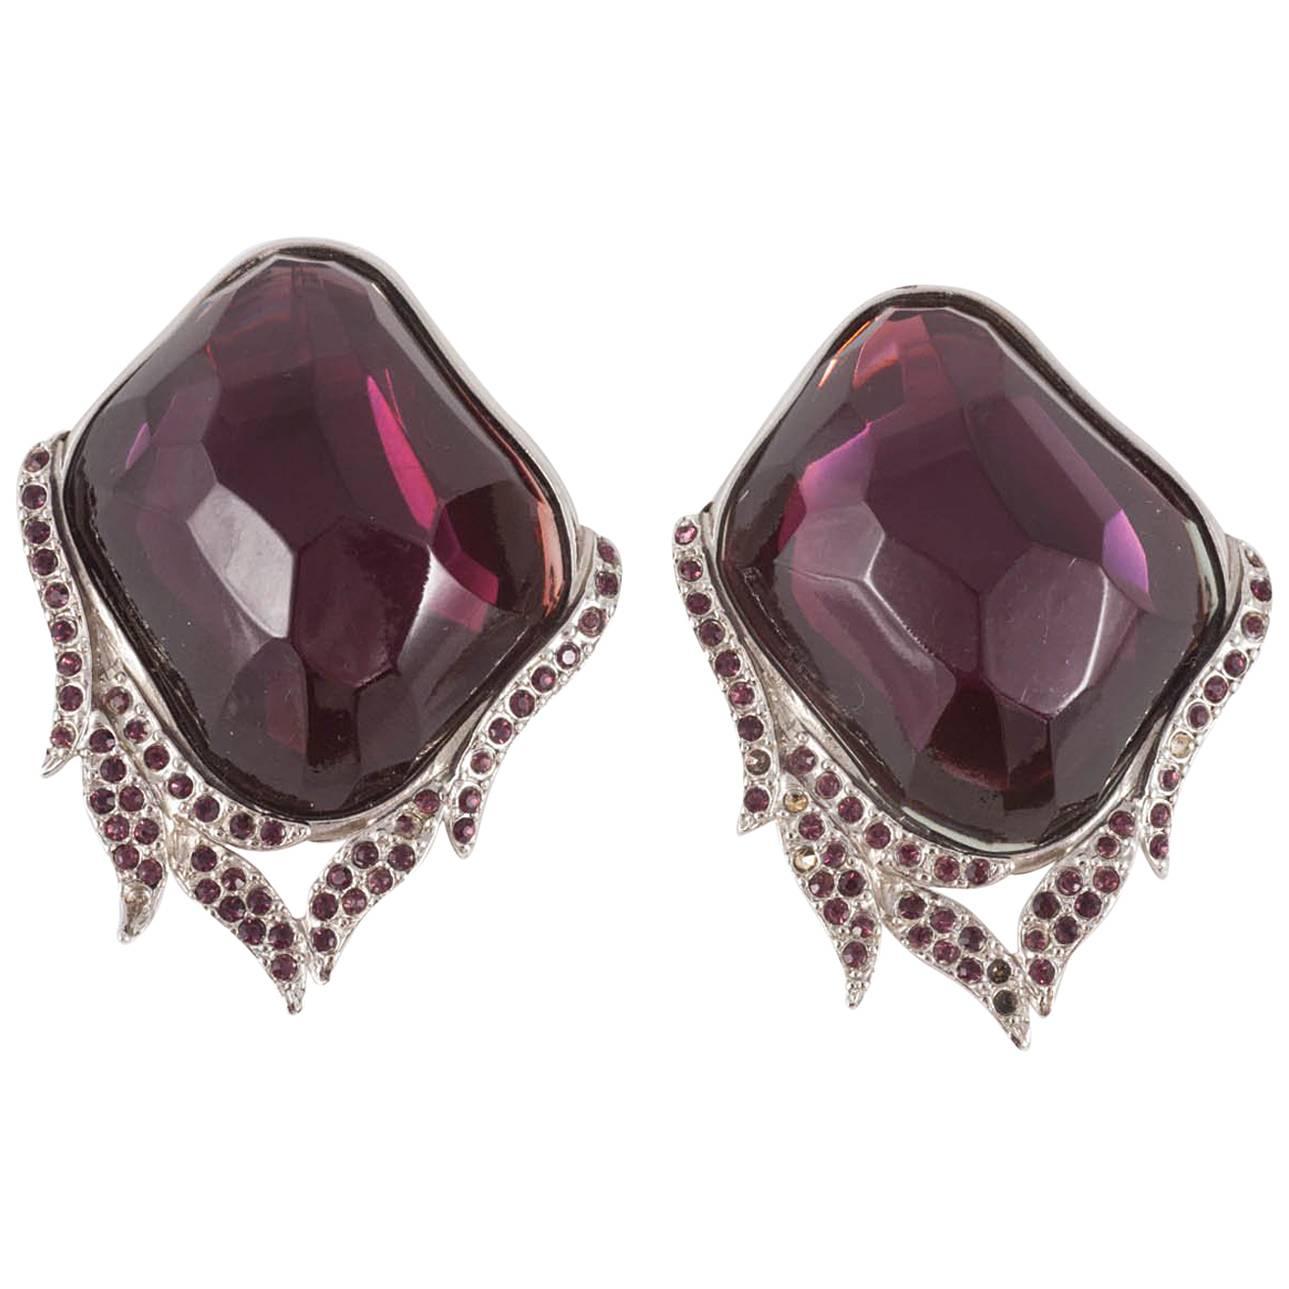 Magnificent amethyst Lucite and paste 'flame' earrings, Yves Saint Laurent, 1980